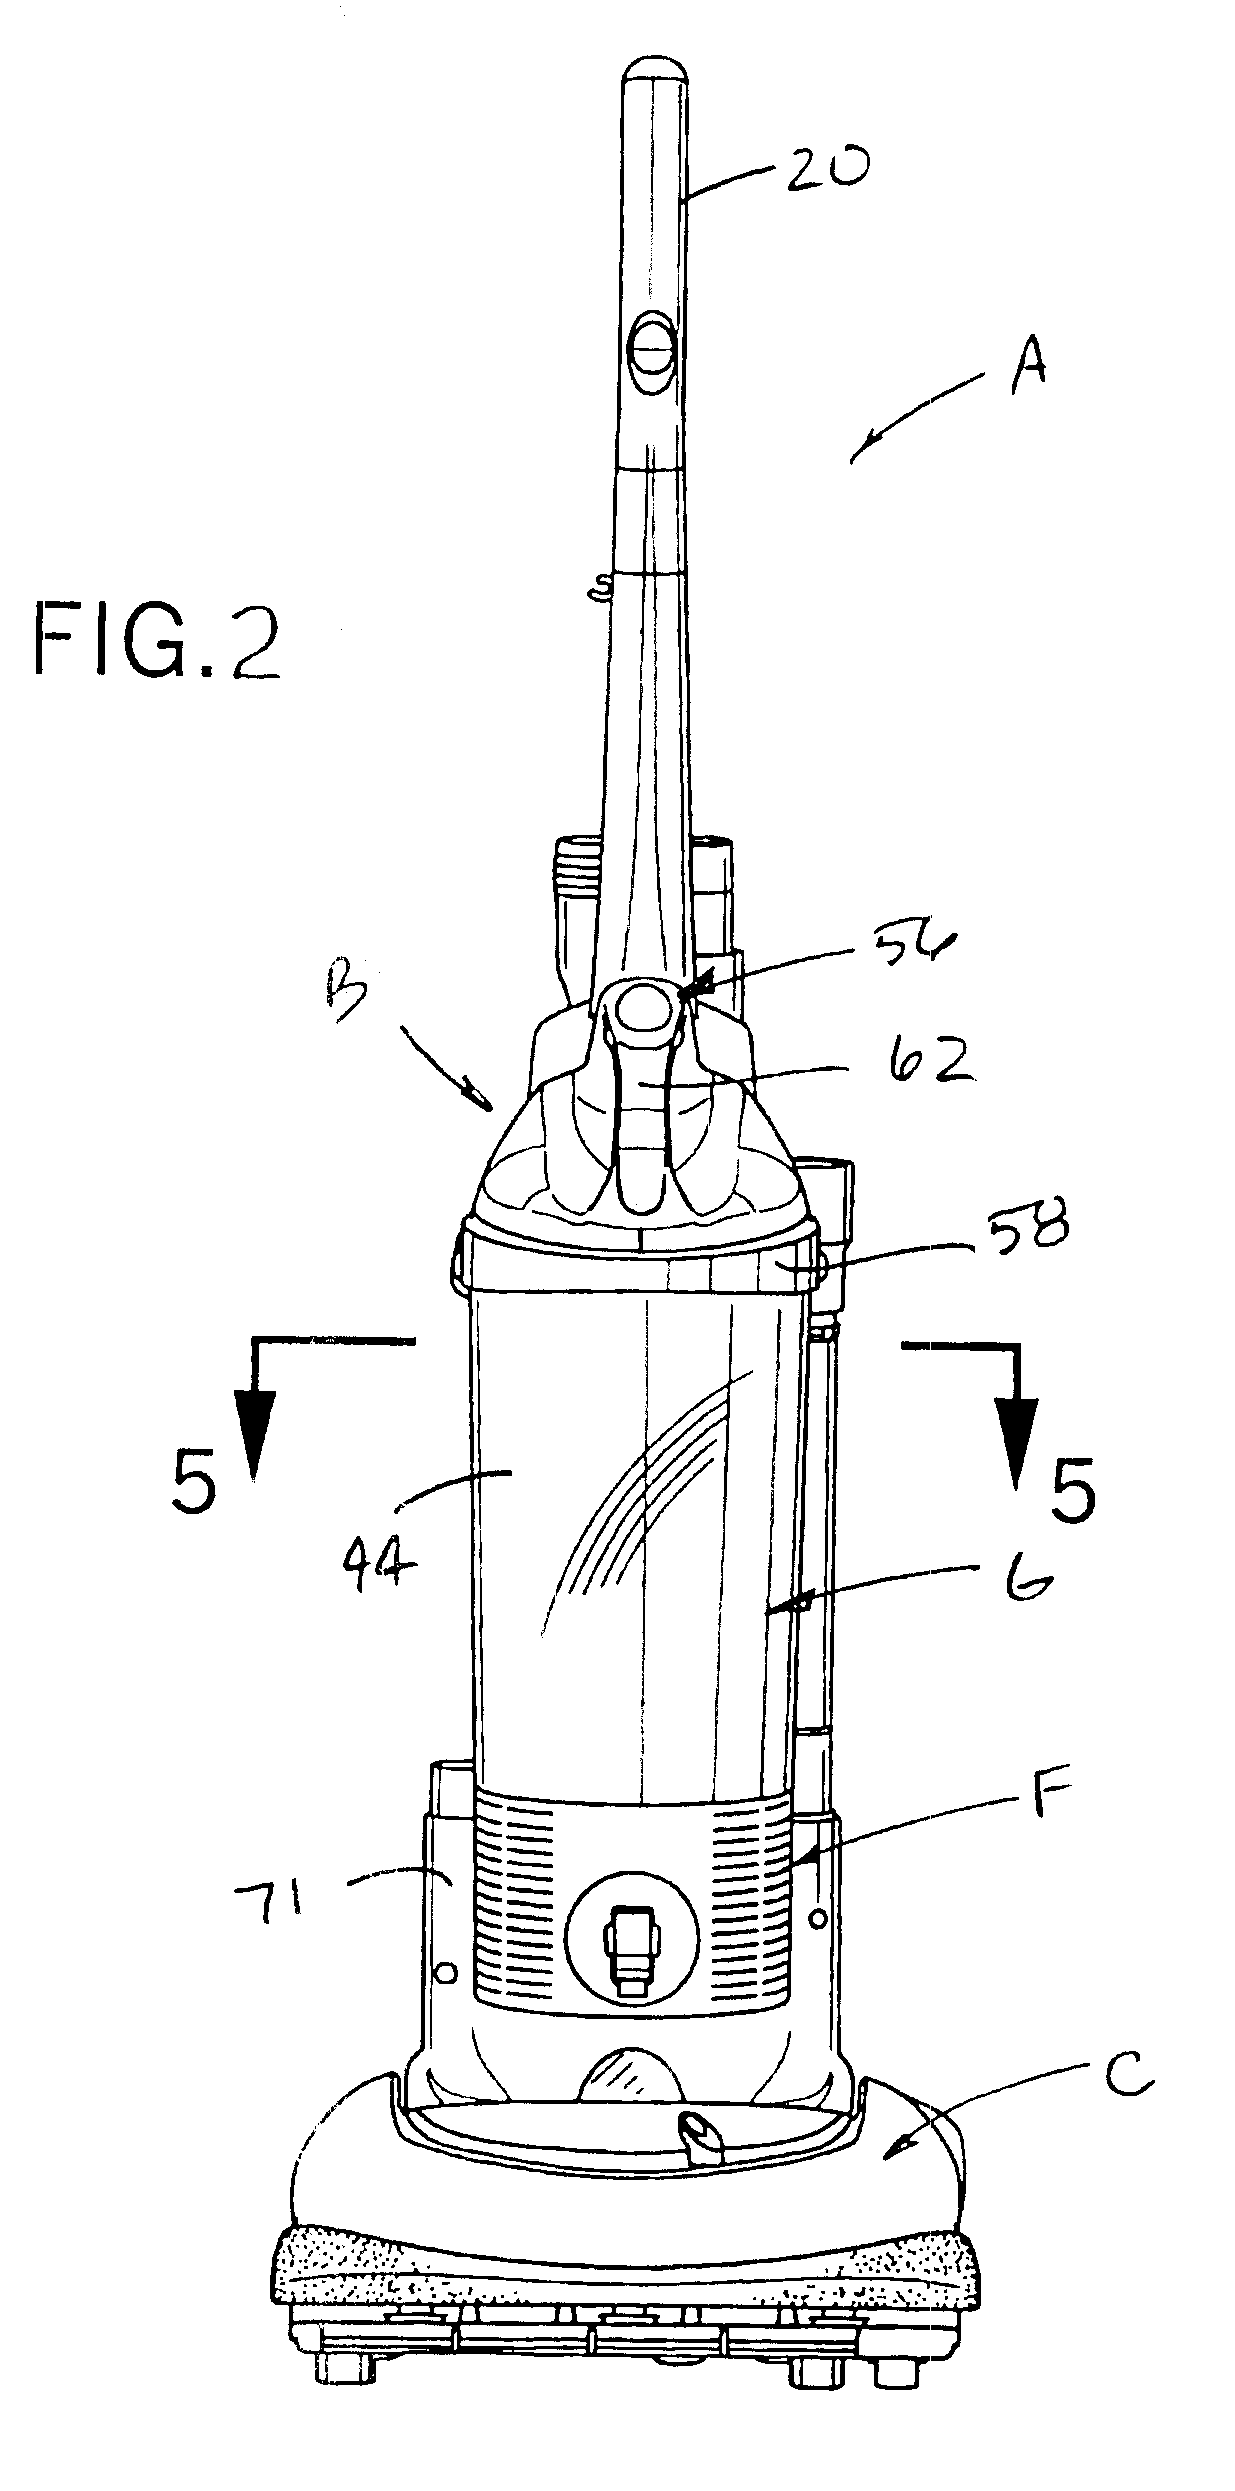 Upright vacuum cleaner with cyclonic airflow pathway